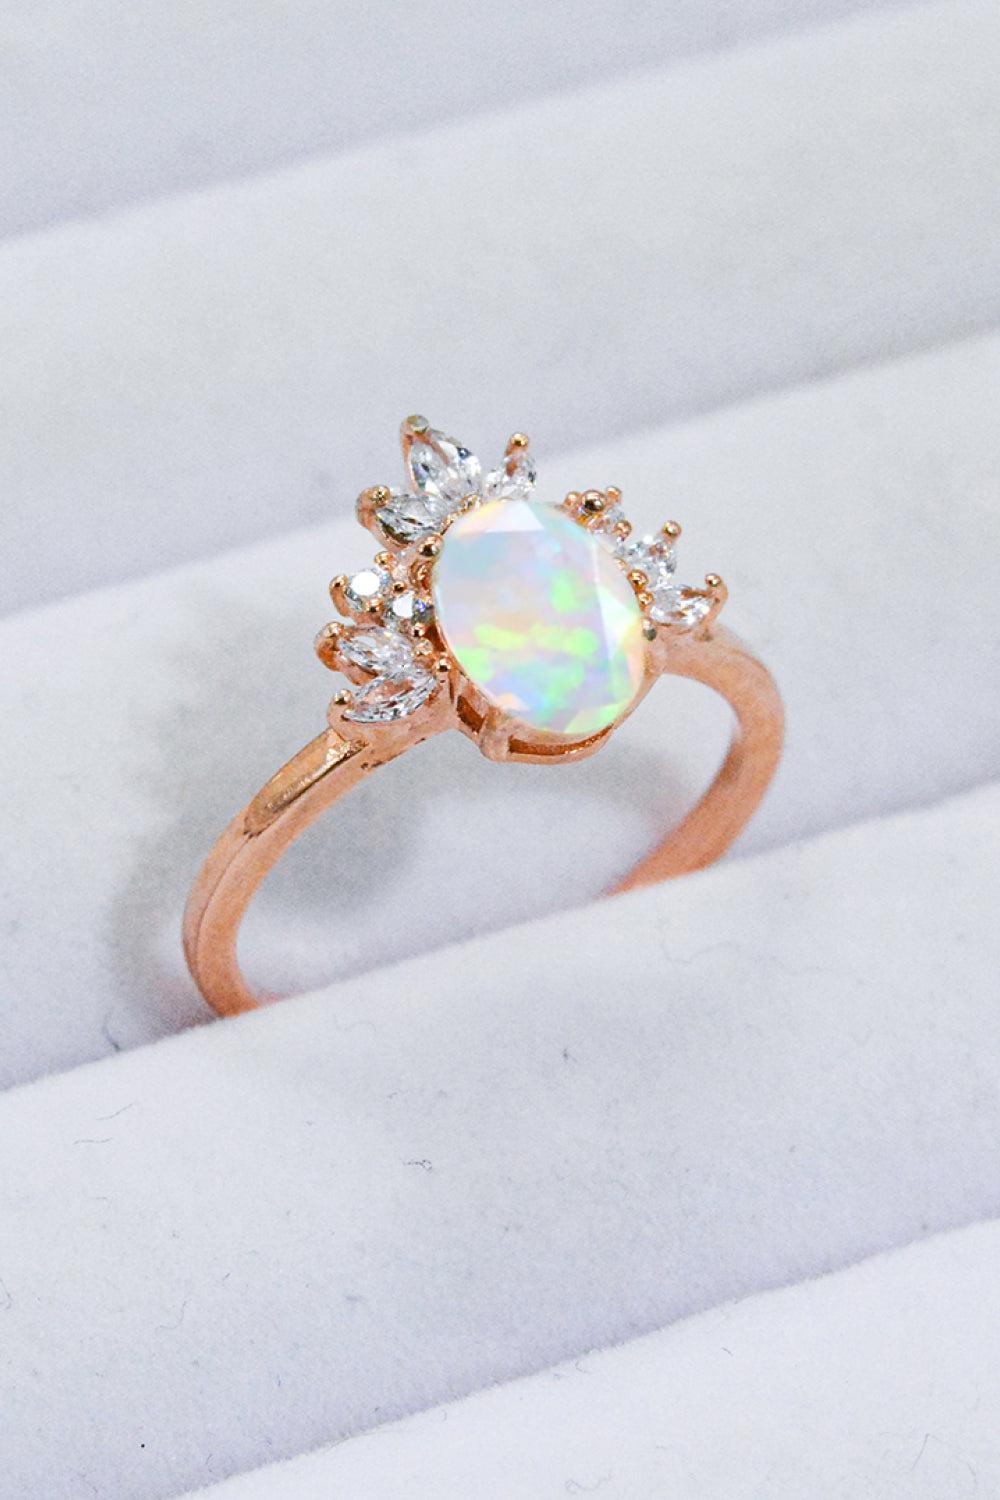 Best Of Me 925 Sterling Silver Opal Ring BLUE ZONE PLANET